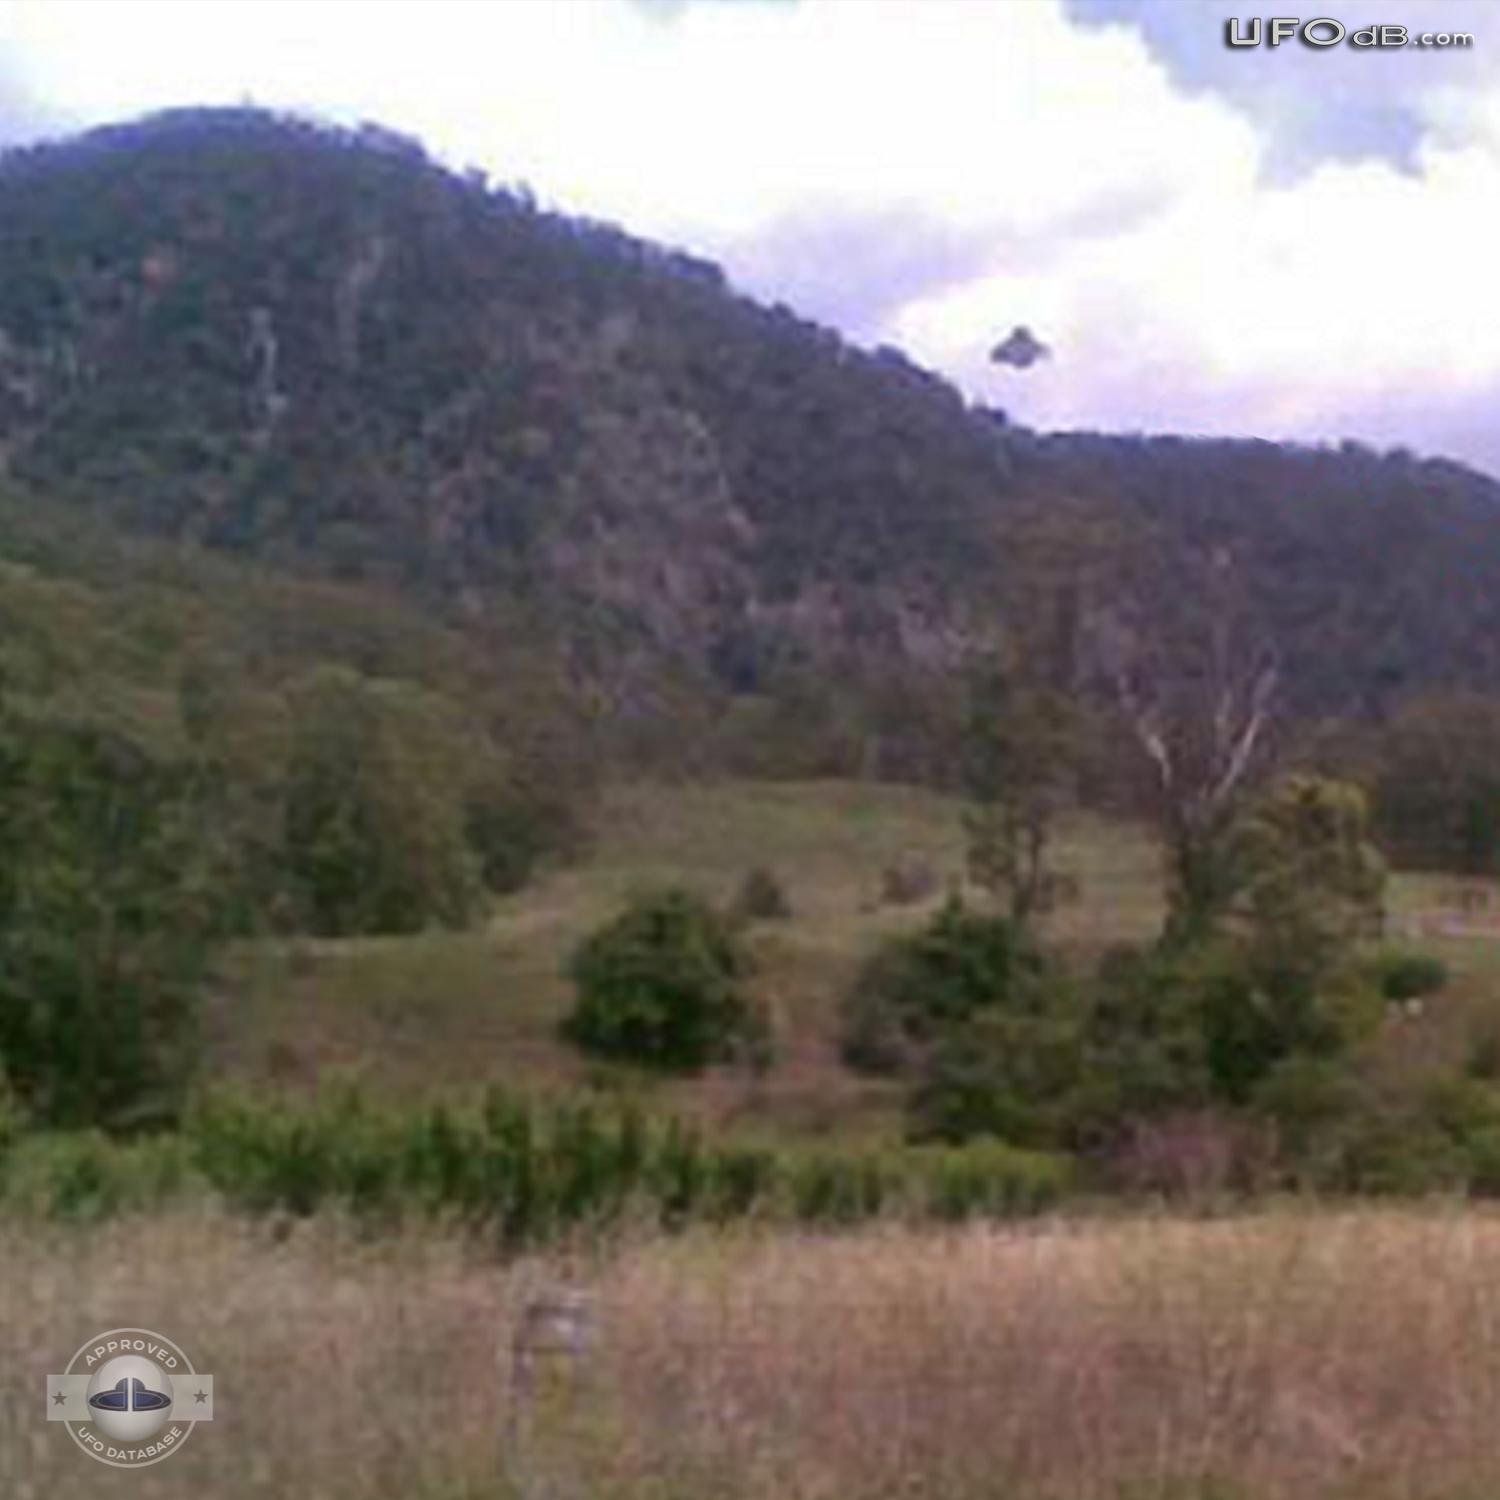 Australian Gold prospector capture UFO on picture in New South Wales UFO Picture #354-1